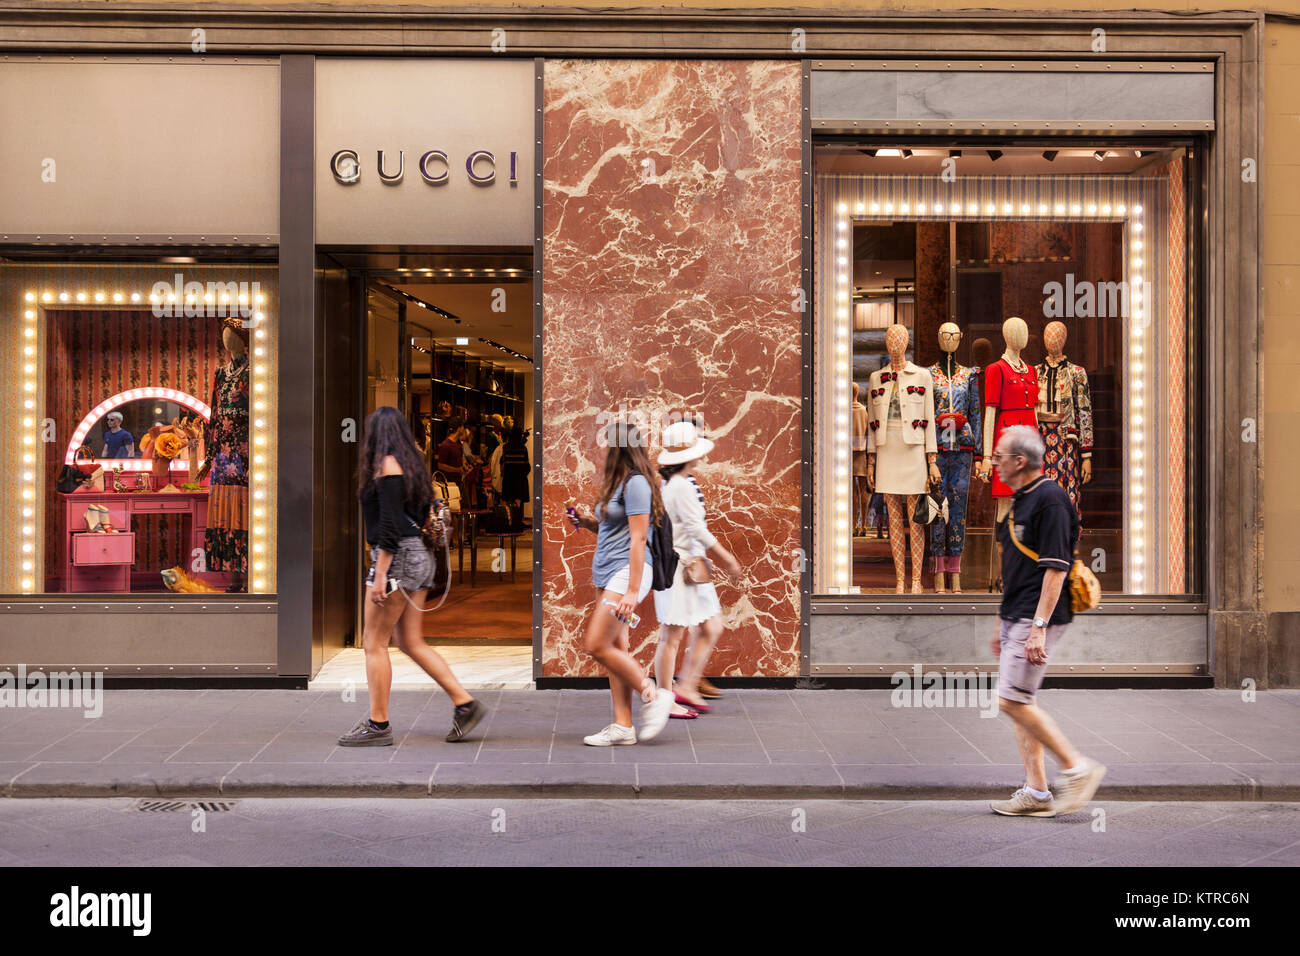 Gucci Brand High Resolution Stock Photography and Images - Alamy